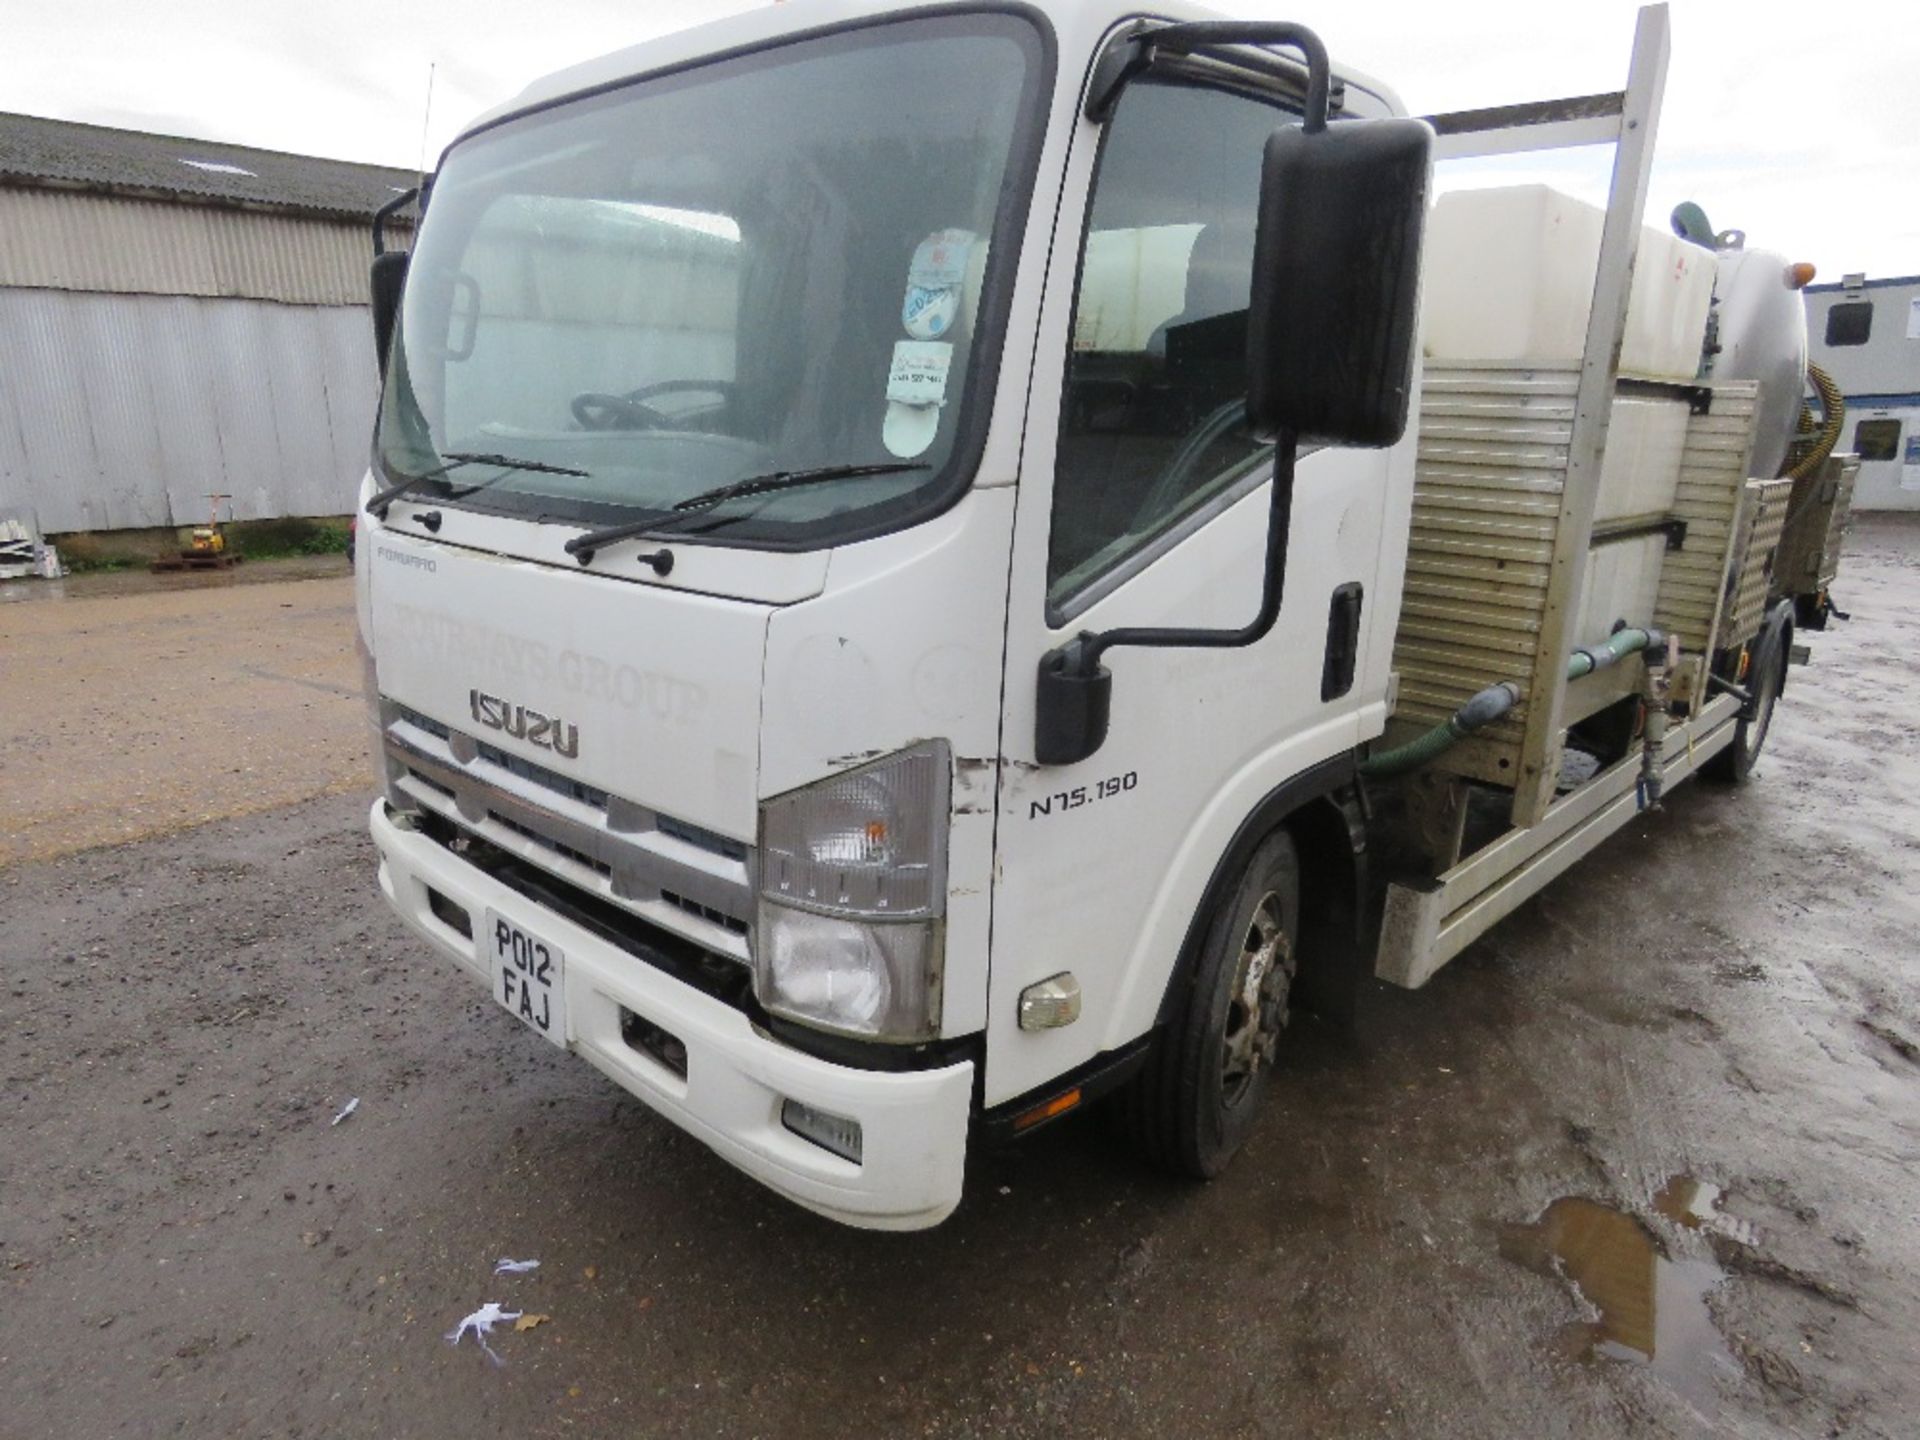 ISUZU 7500KG PORTABLE TOILET SERVICE TRUCK REG:PO12 FAJ. WITH V5, OWNED FROM NEW, 70,521REC MILES. - Image 17 of 17